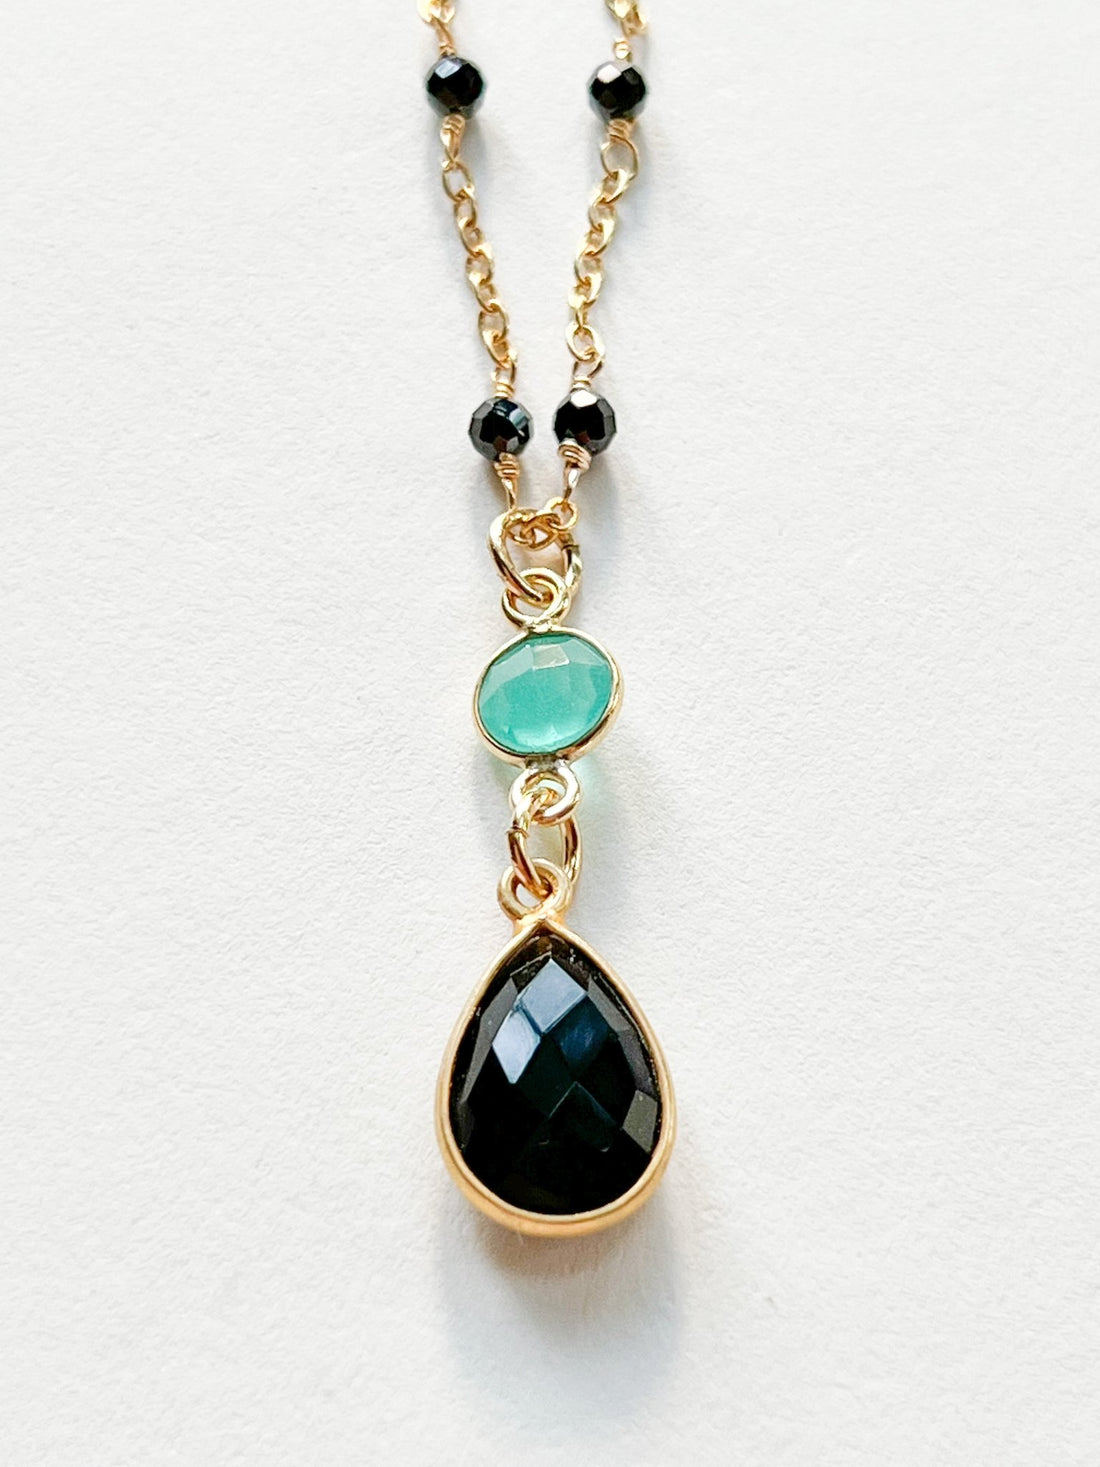 Black Onyx and Chrysoprase Double Drop Pear Shaped Pendant Necklace on Gold Chain with Black Onyx by Sage Machado - The Sage Lifestyle